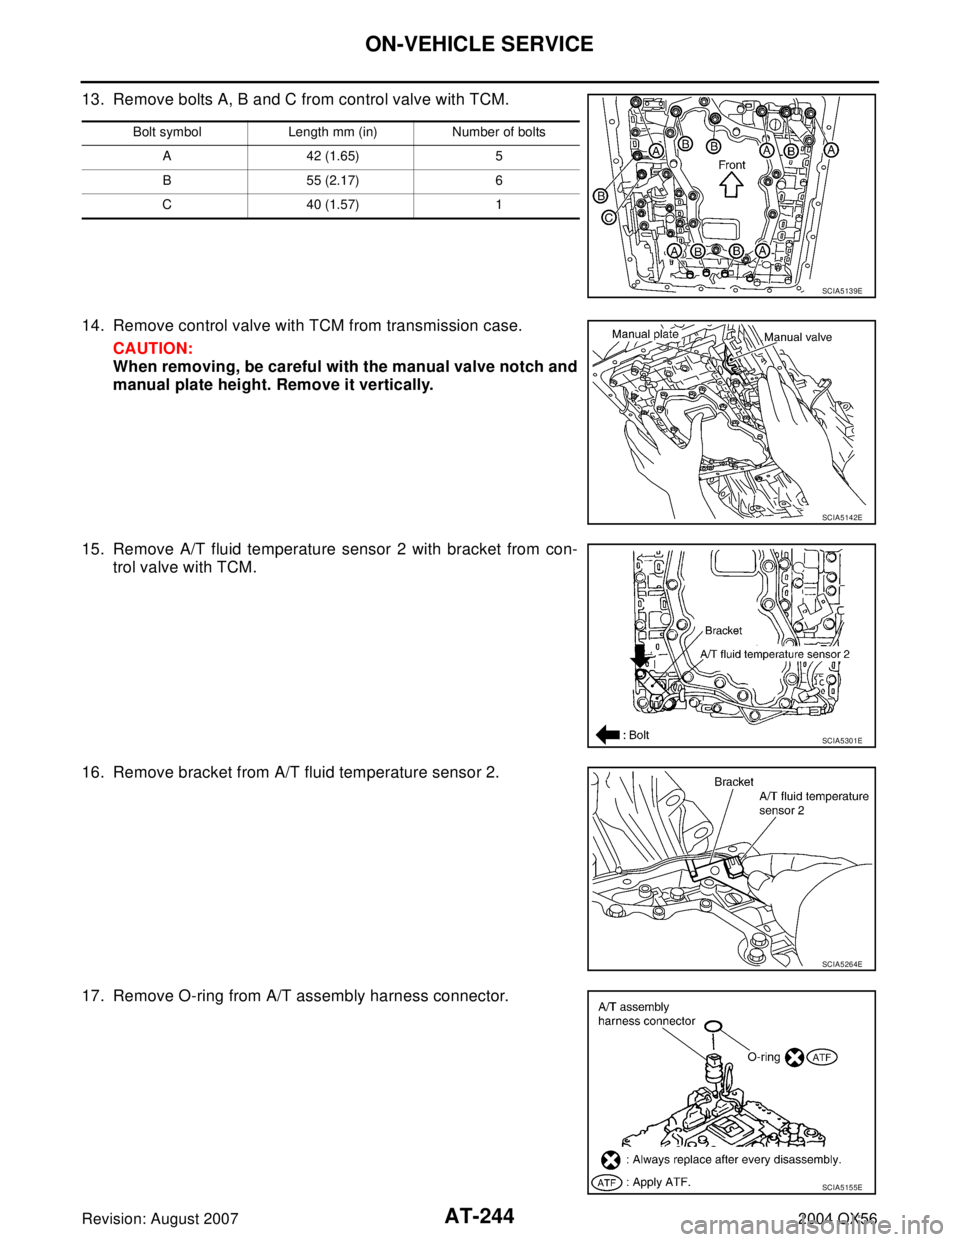 INFINITI QX56 2004  Factory Service Manual AT-244
ON-VEHICLE SERVICE
Revision: August 20072004 QX56
13. Remove bolts A, B and C from control valve with TCM.
14. Remove control valve with TCM from transmission case.
CAUTION:
When removing, be c